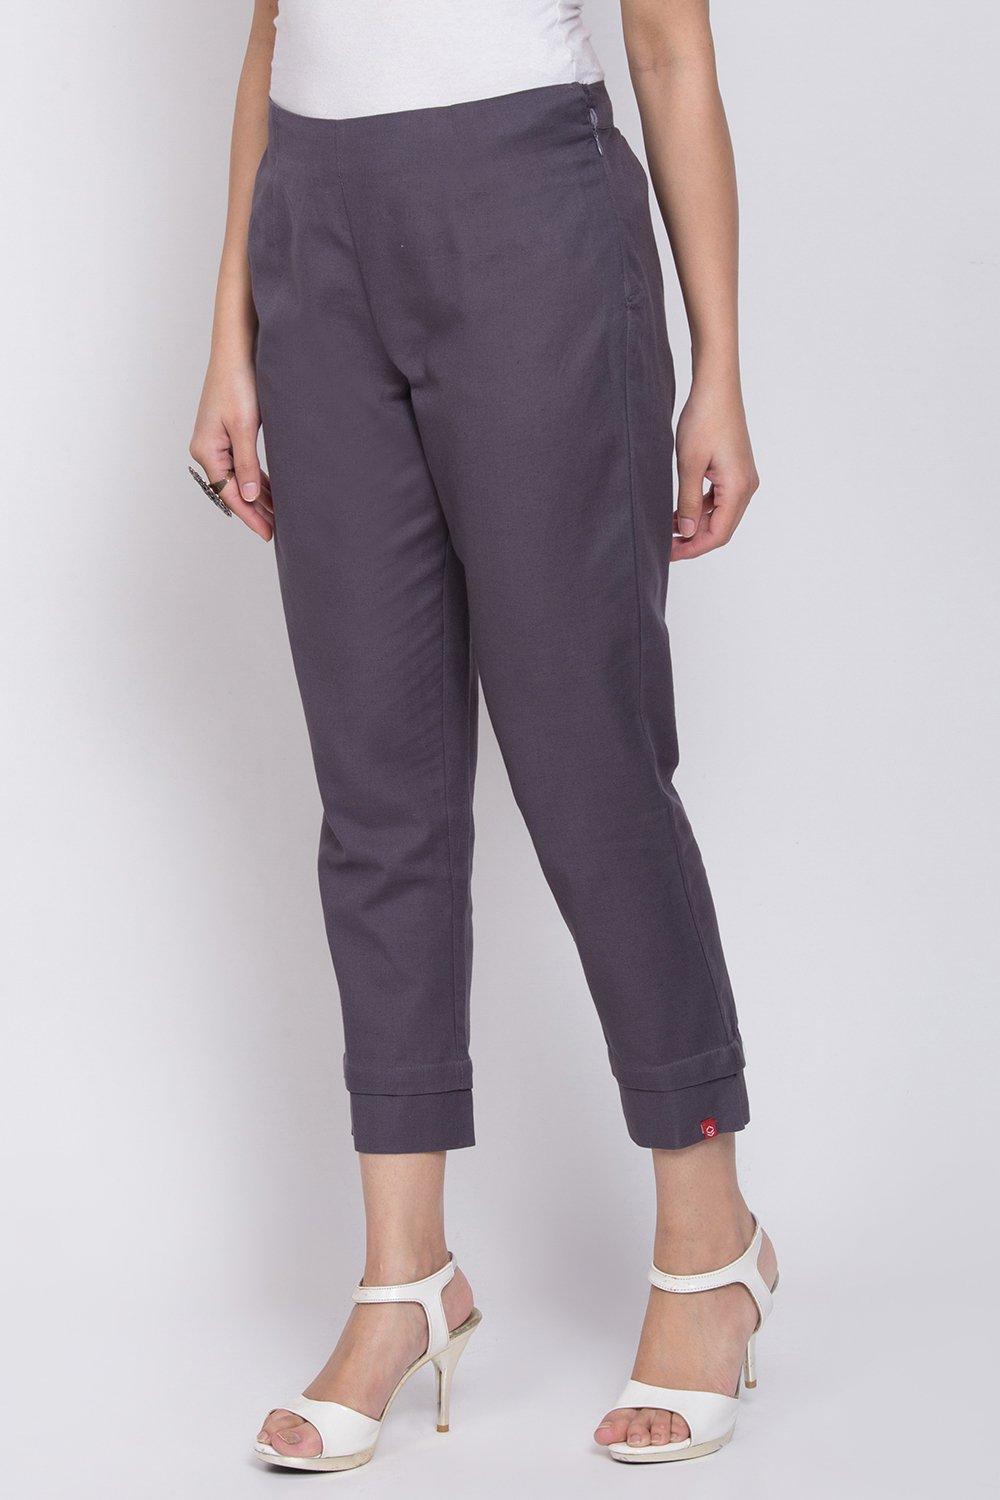 Buy Online Grey Cotton Flax Pants for Women & Girls at Best Prices in ...